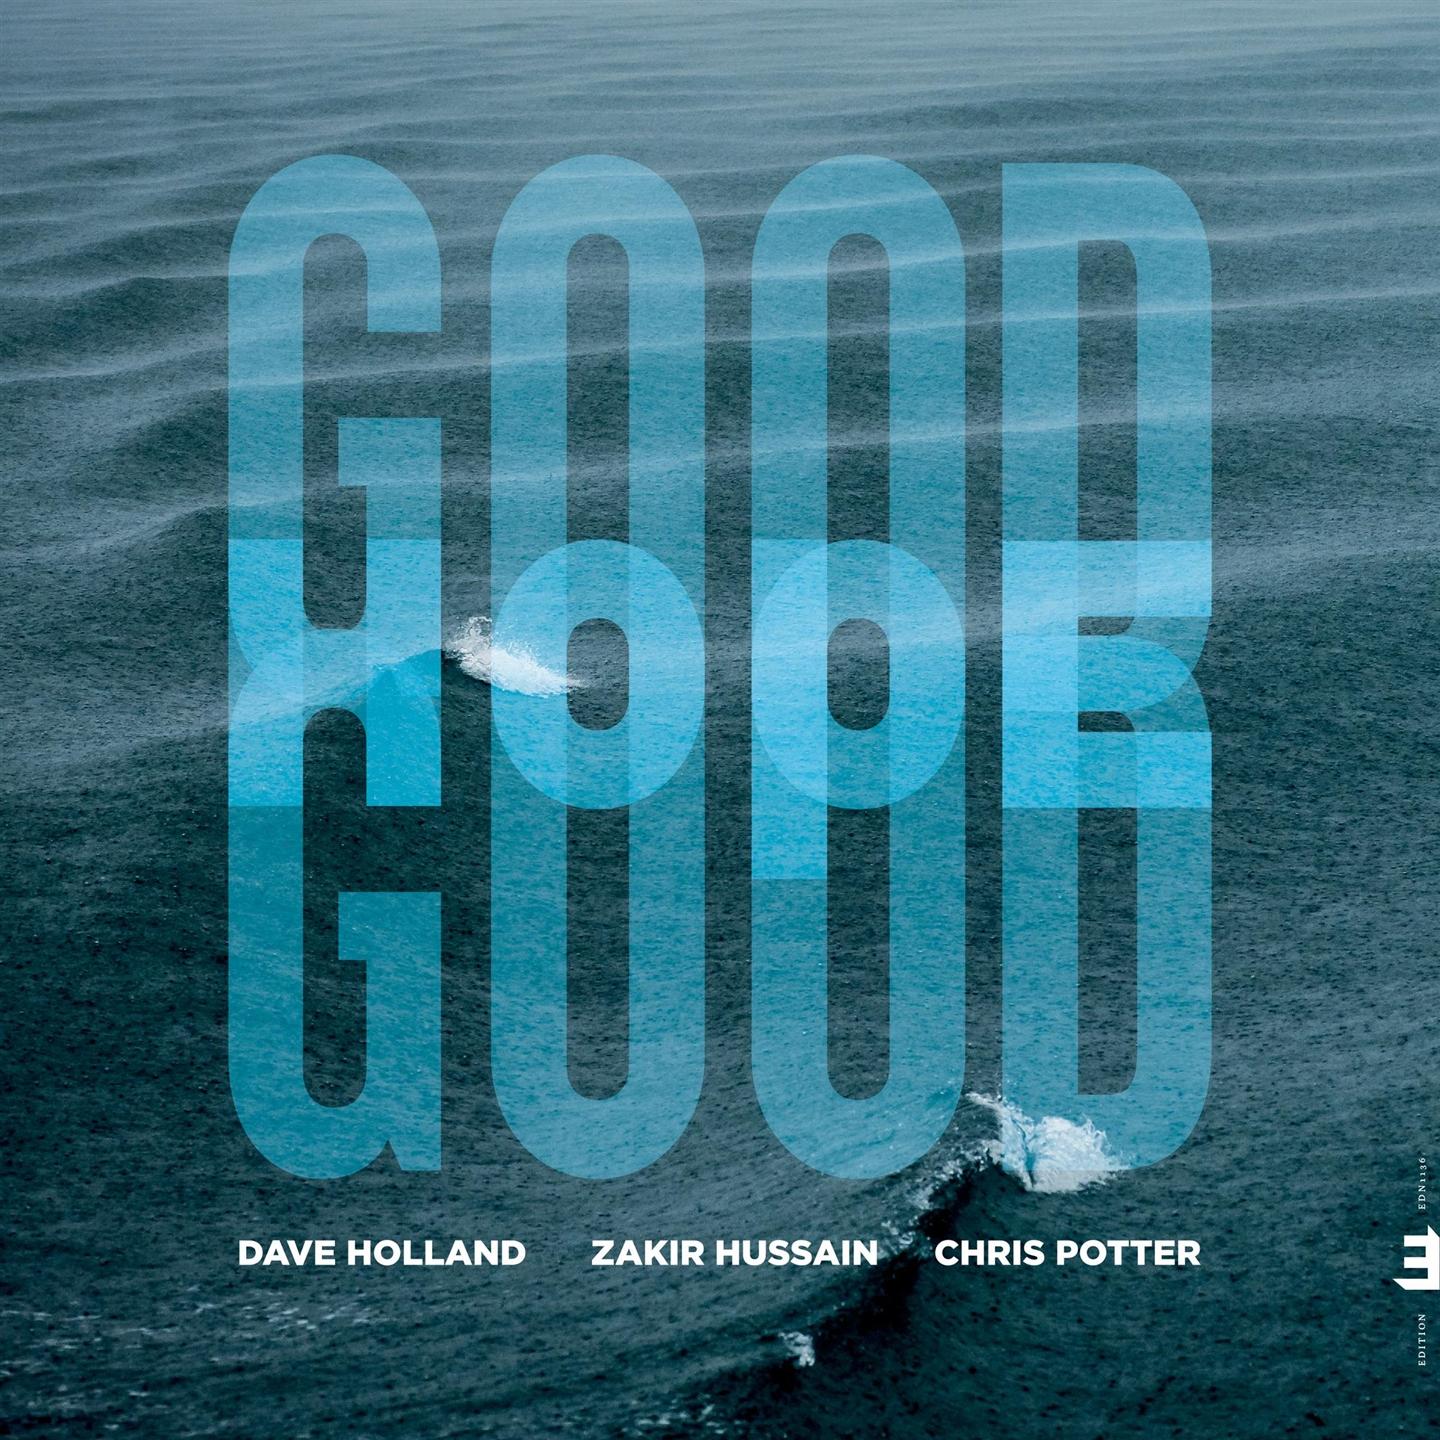 Dave Holland, Zakir Hussain, Chris Potter - Good Hope - Picture 1 of 1